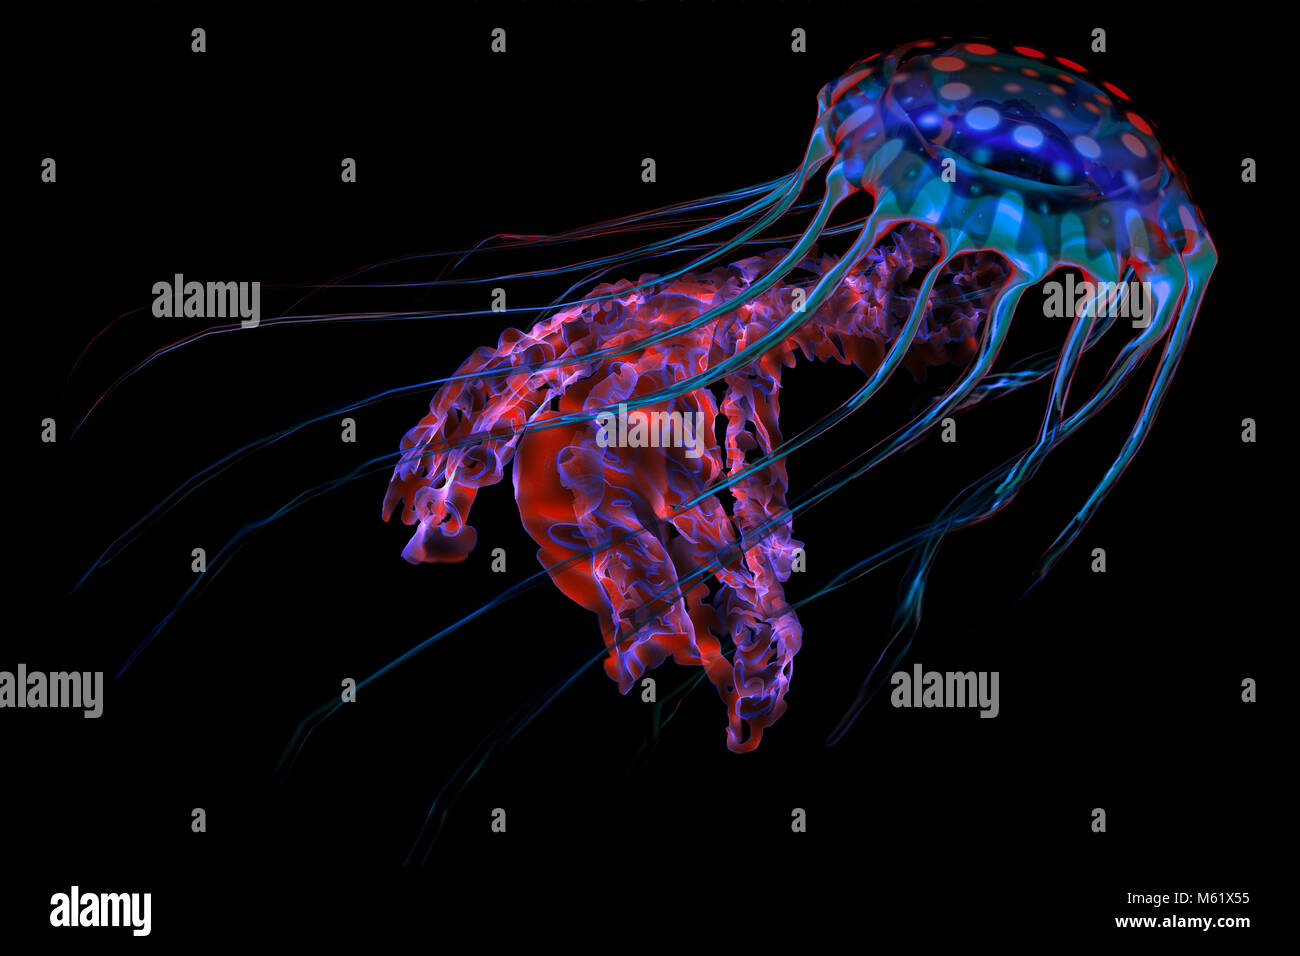 The ocean jellyfish searches for fish prey and uses its poisonous tentacles to subdue the animals it hunts. Stock Photo